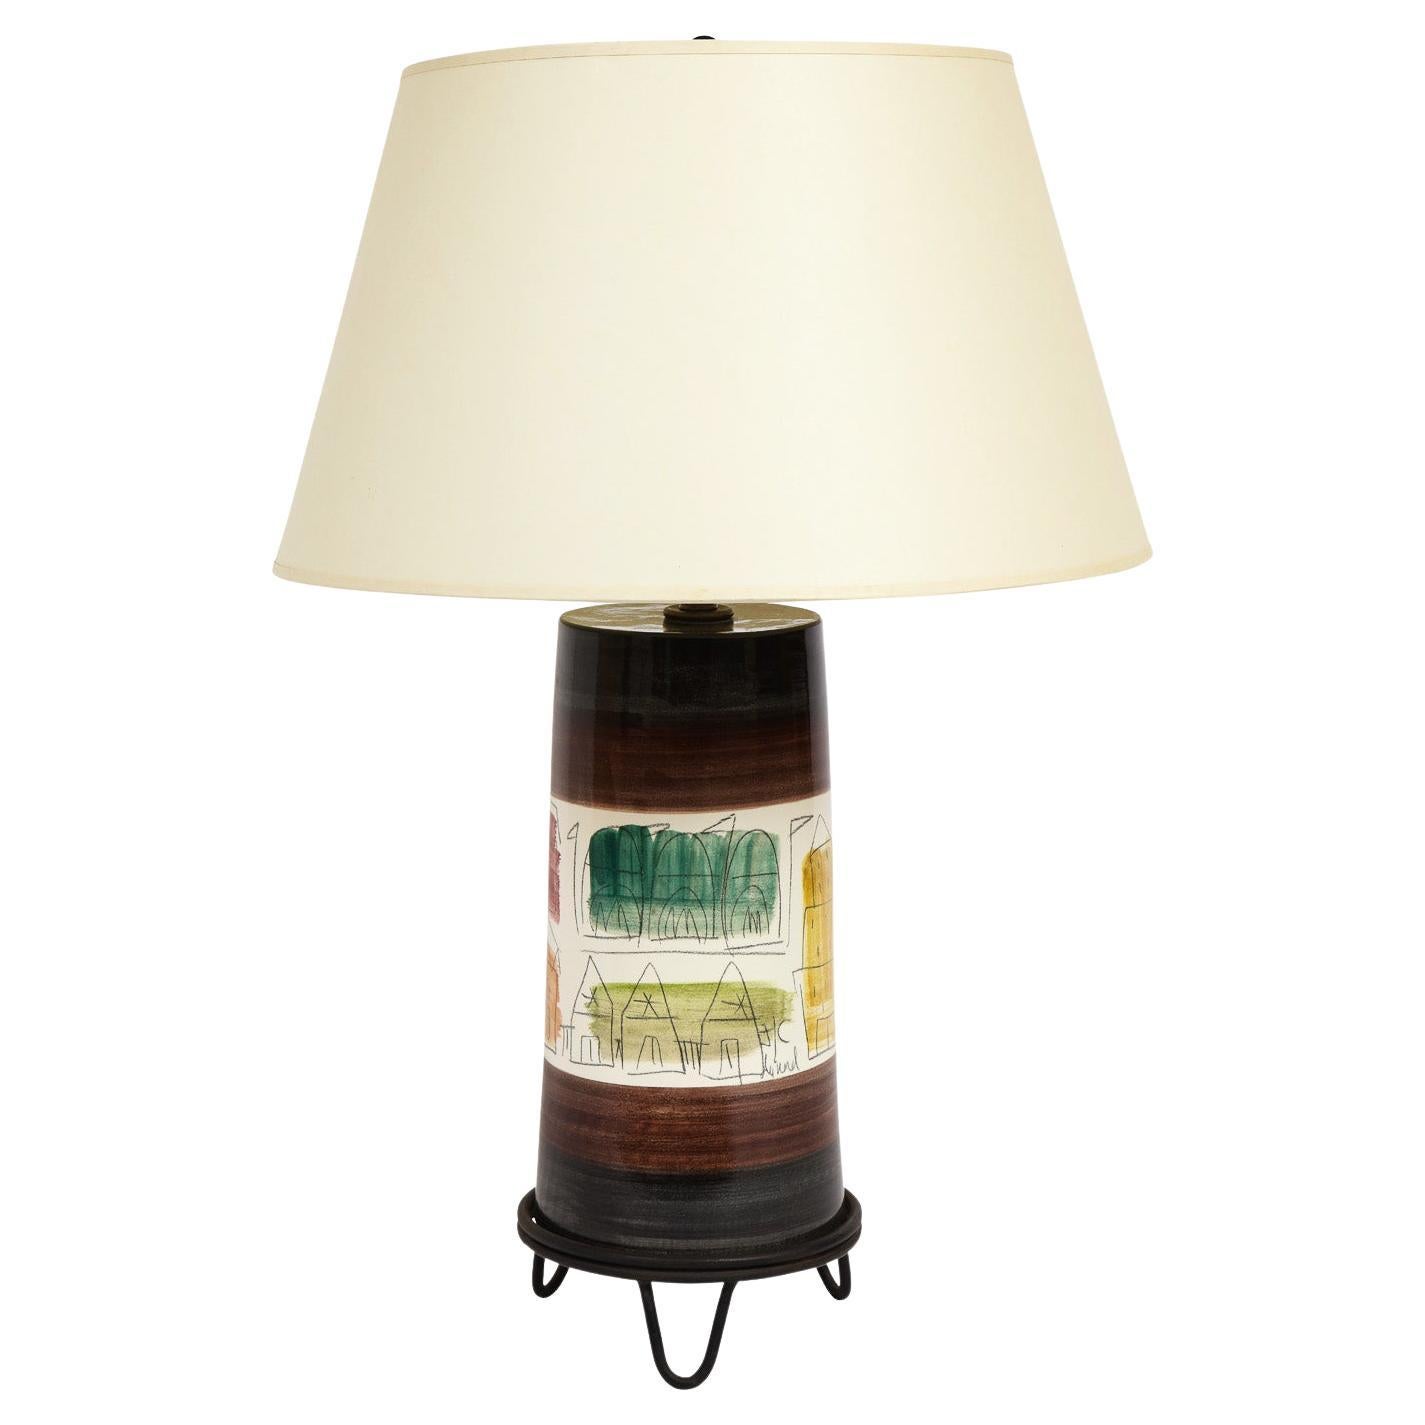 Artisan Ceramic Table Lamp with Architectural Motifs 1960s 'Signed'